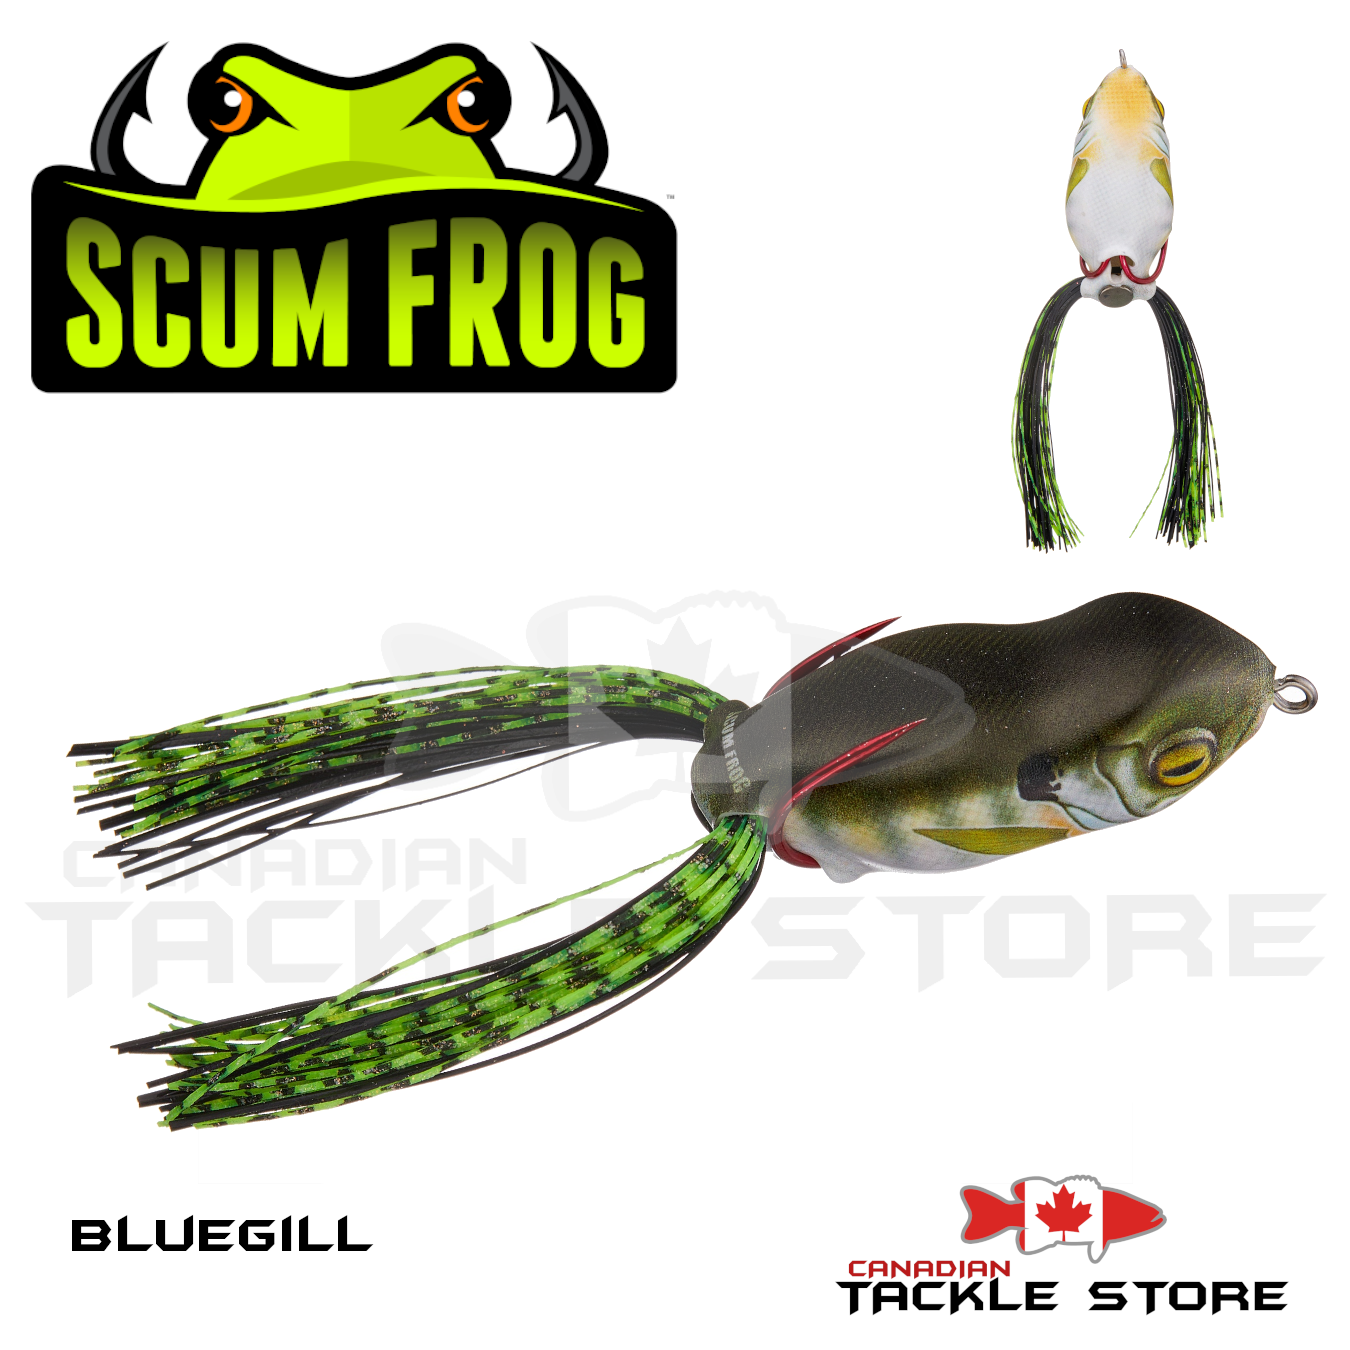 Buy Scum Frog Thomas & Friends Southern Lure Scum Frog Popper